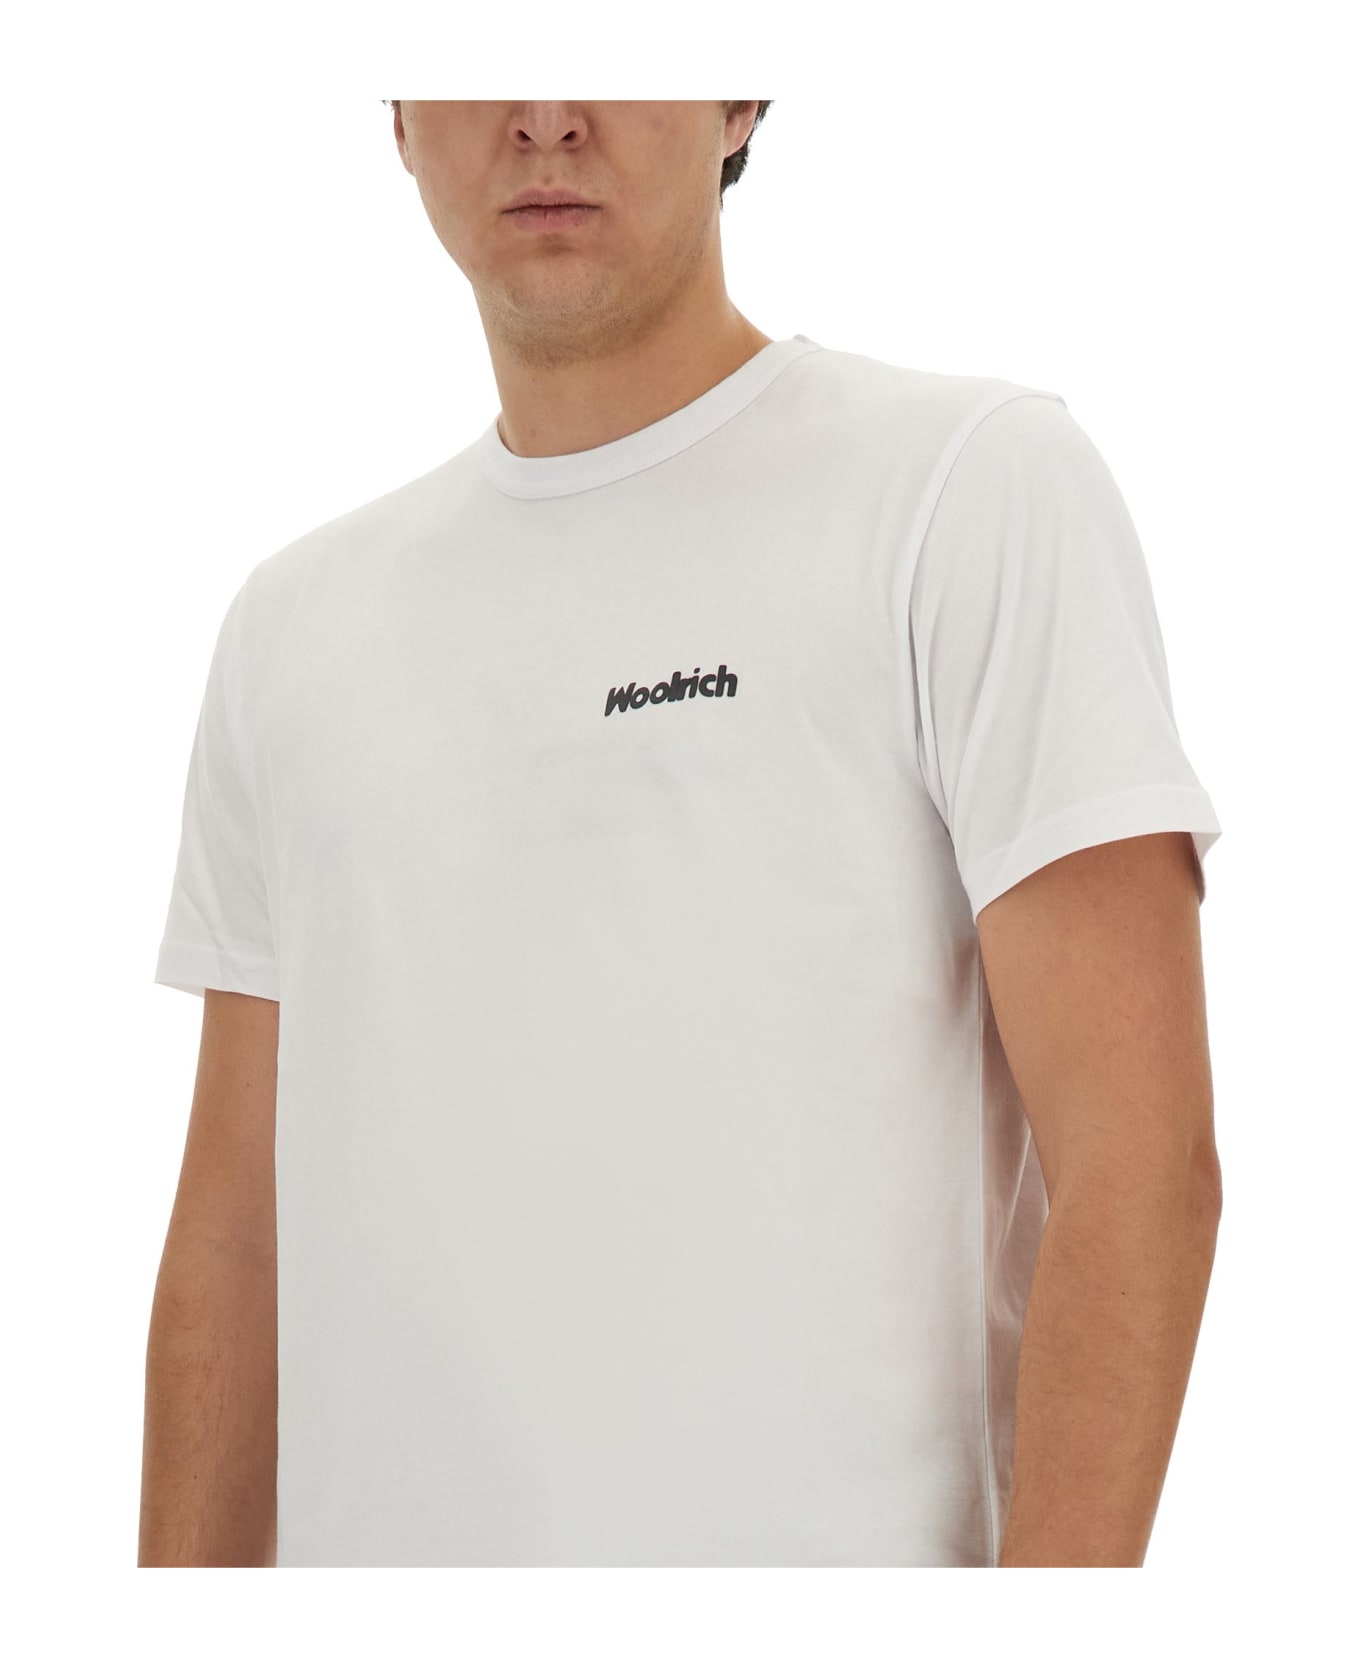 Woolrich T-shirt With Logo - White シャツ